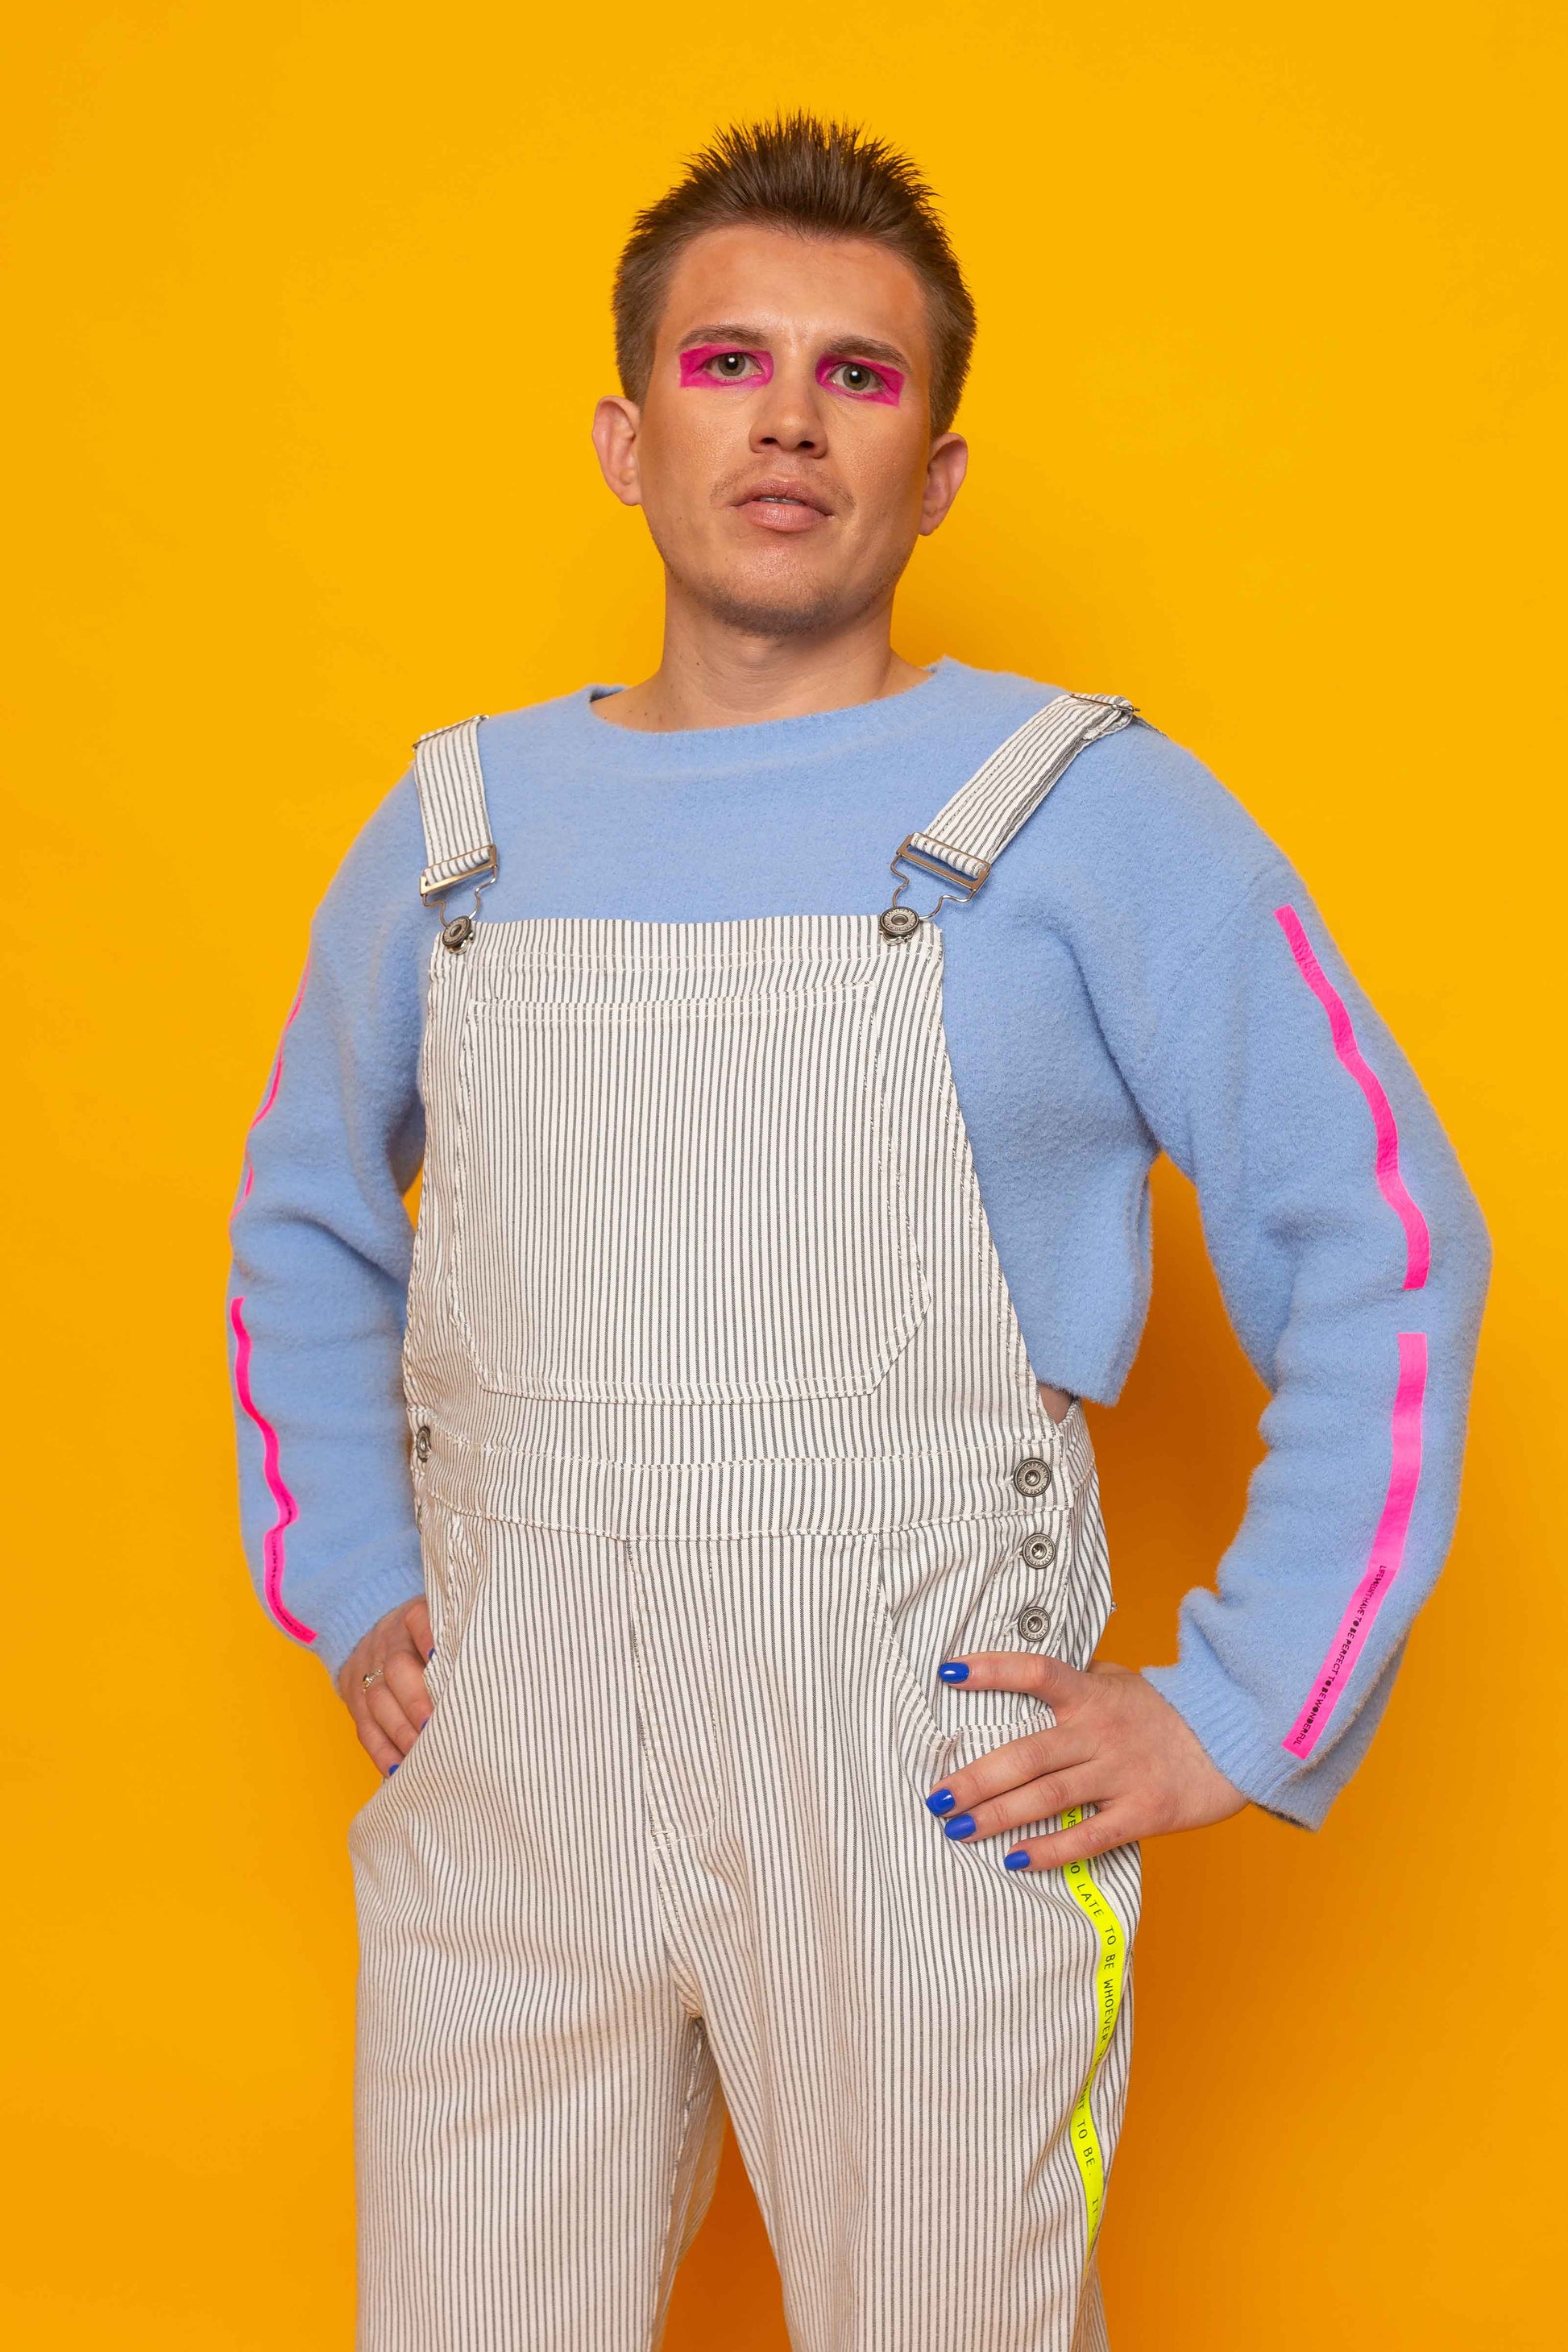 This is The Remix Dungarees IT'S NEVER TOO LATE - Straight Leg Stretch Denim Dungarees in Blue Stripes